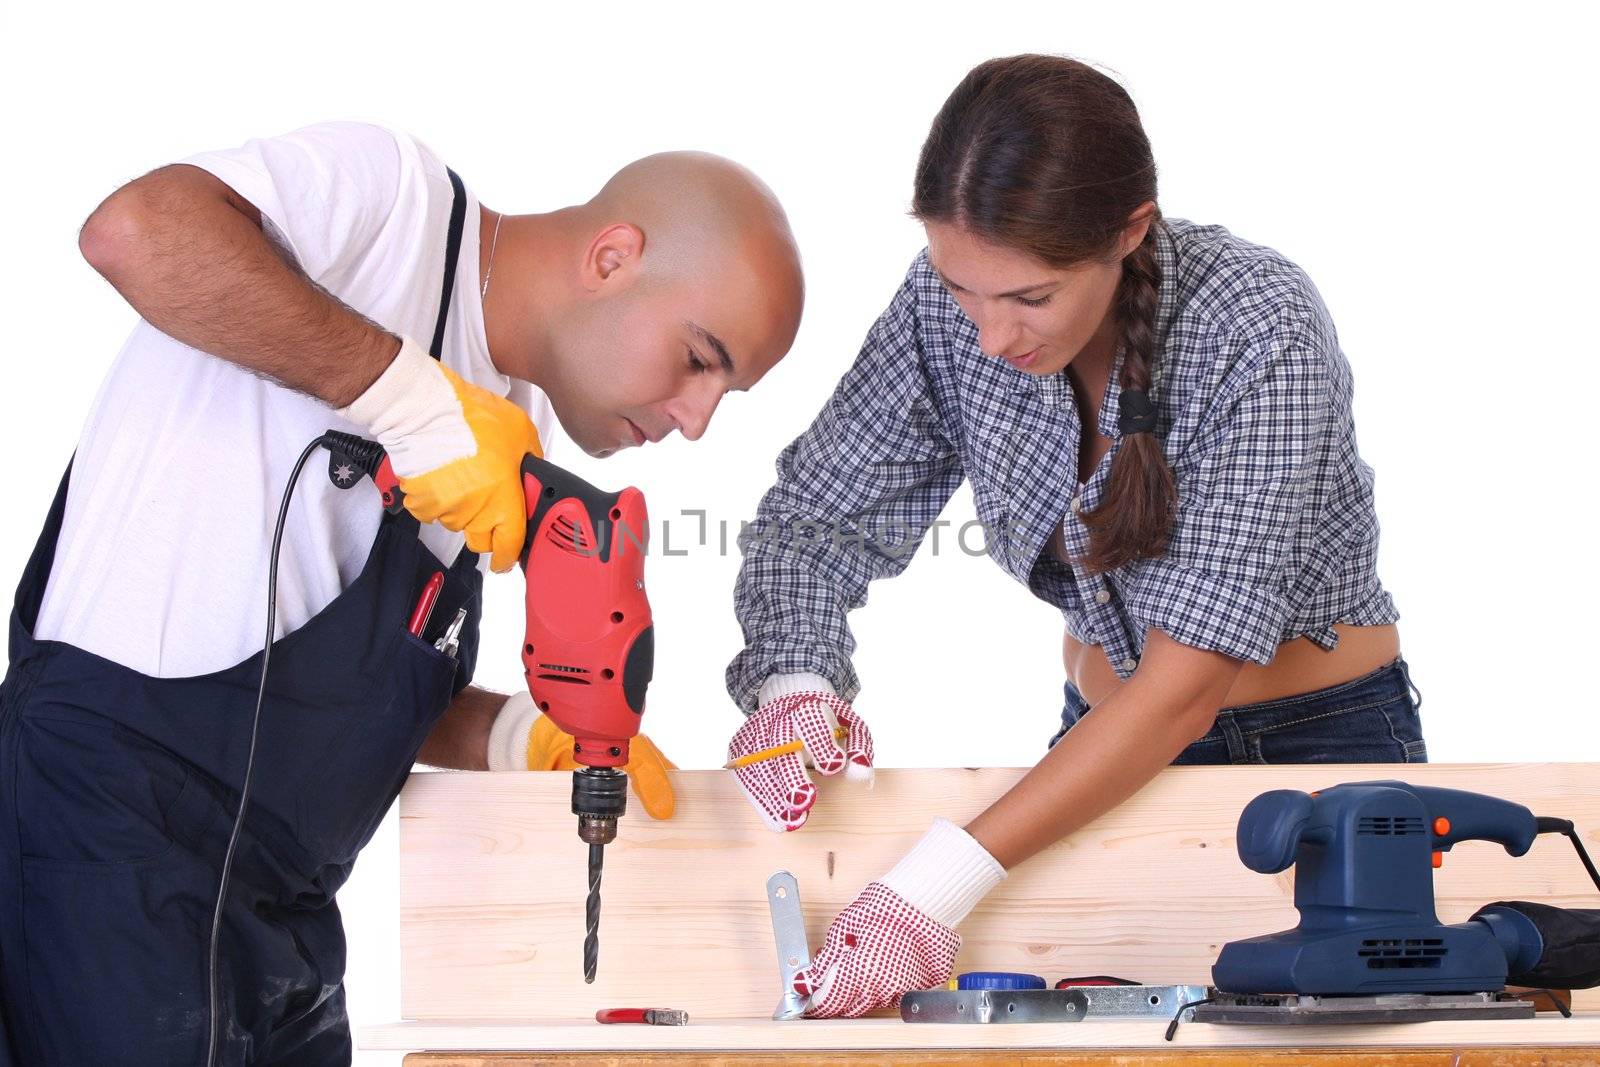 construction workers at work on white background